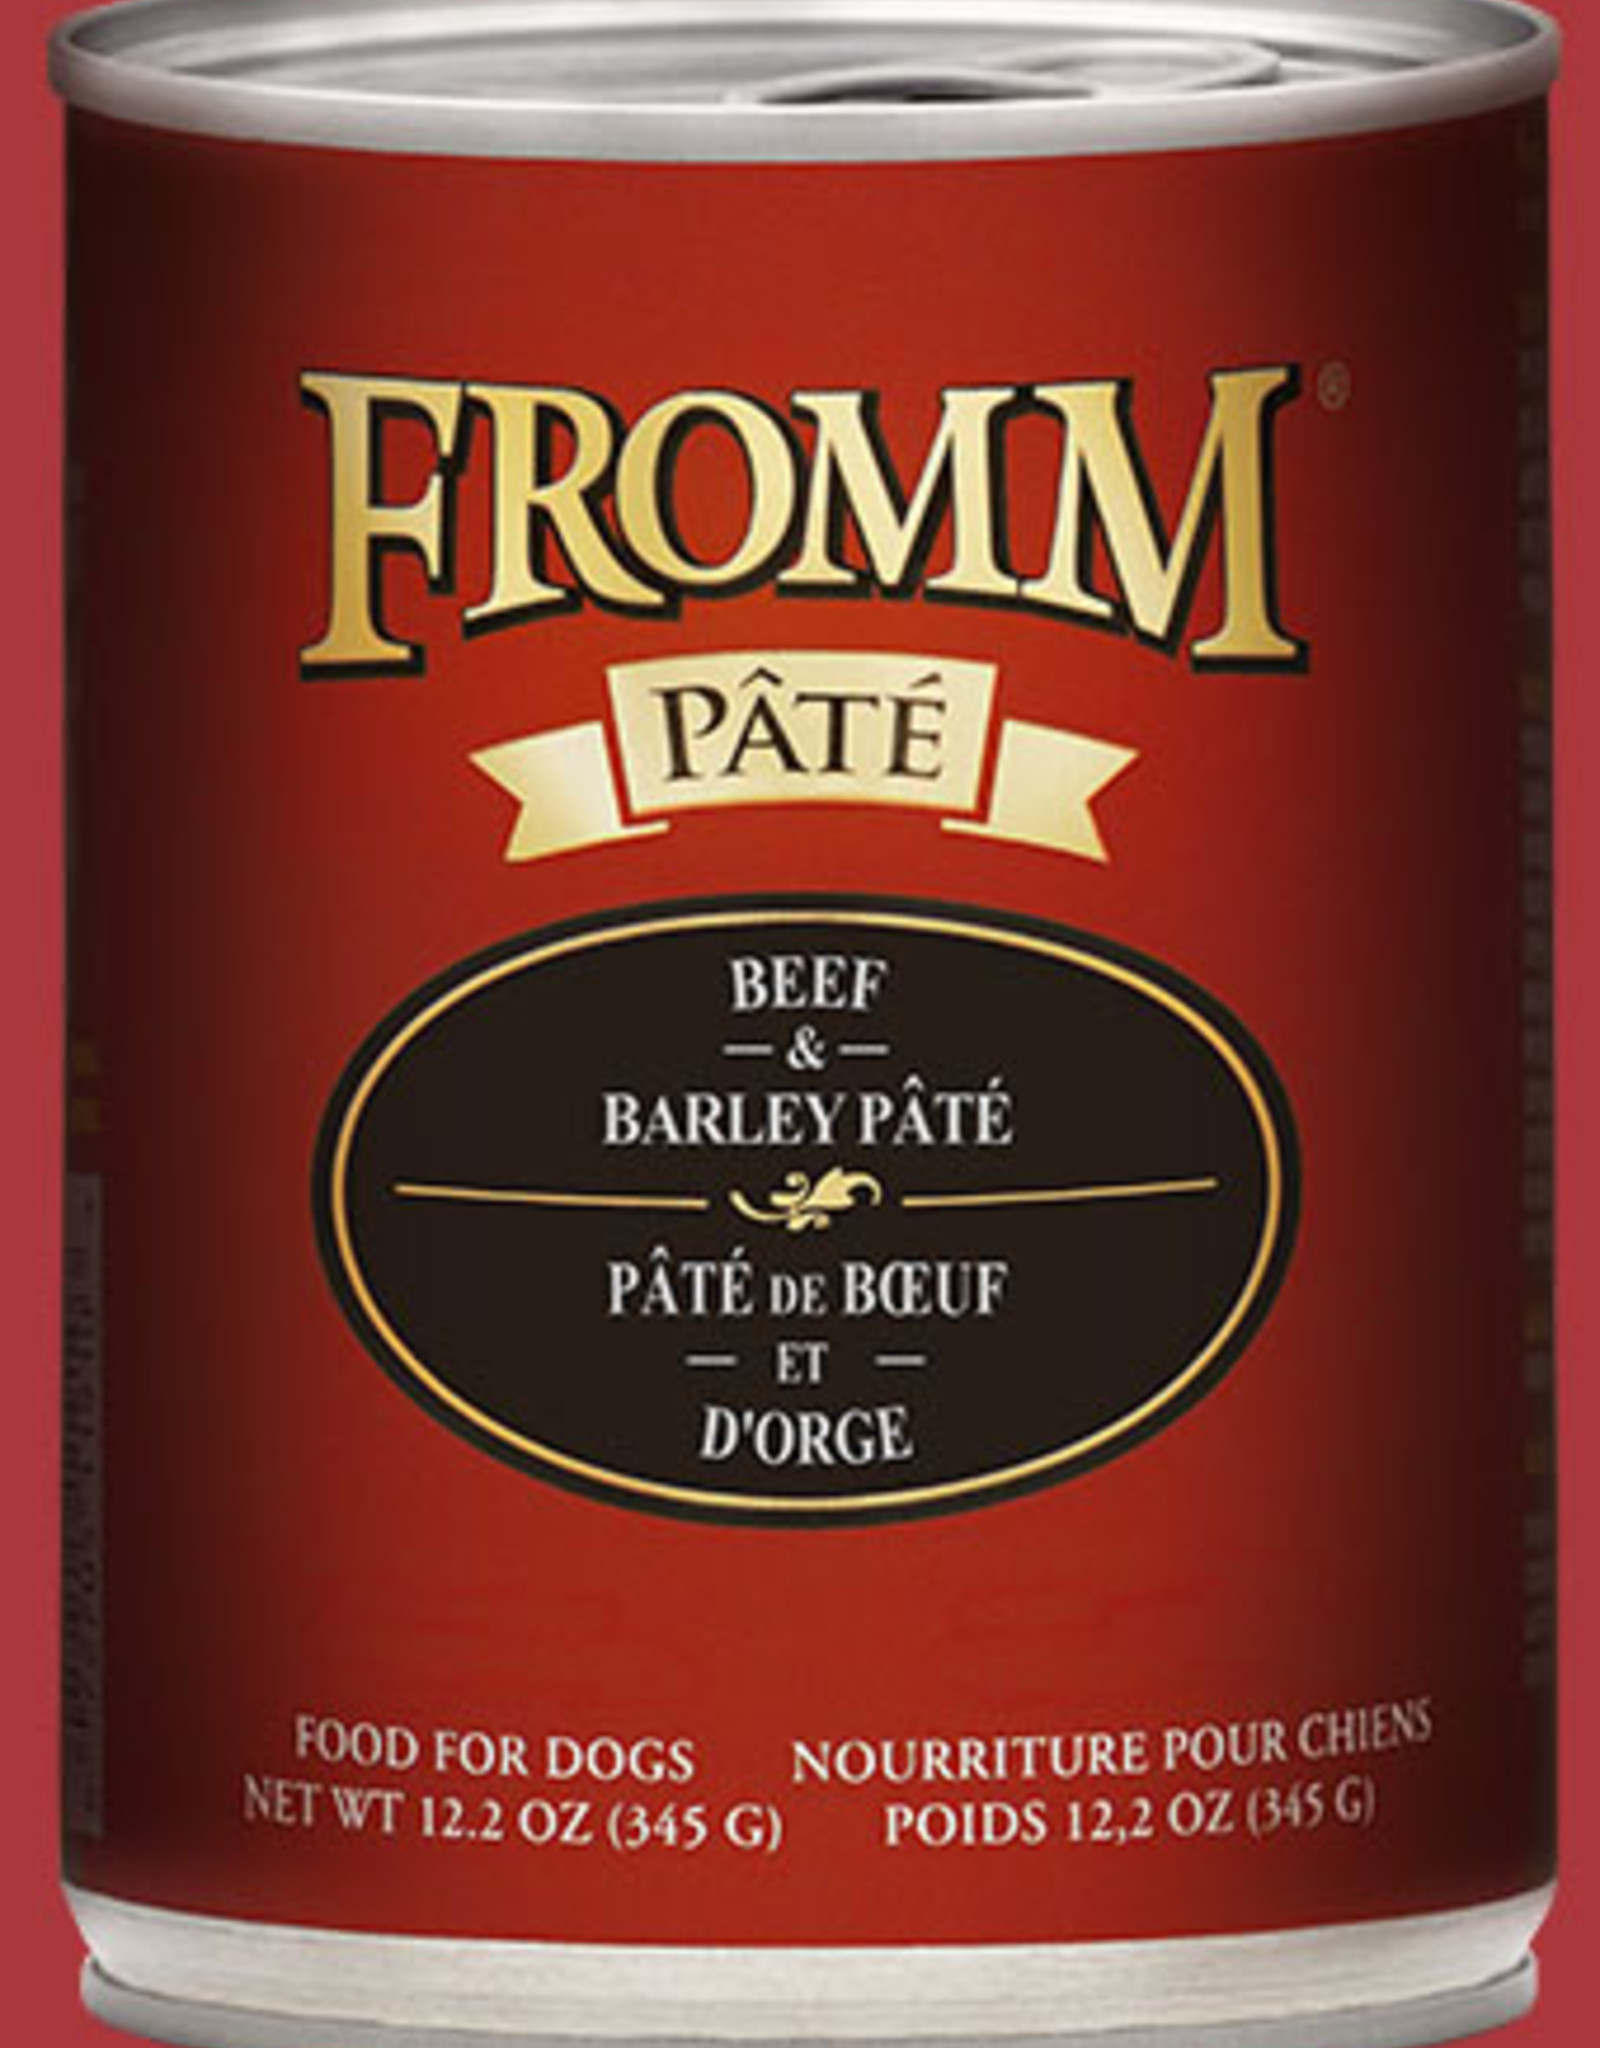 FROMM FAMILY FOODS LLC FROMM DOG PATE BEEF & BARLEY CAN 12.2OZ CASE OF 12